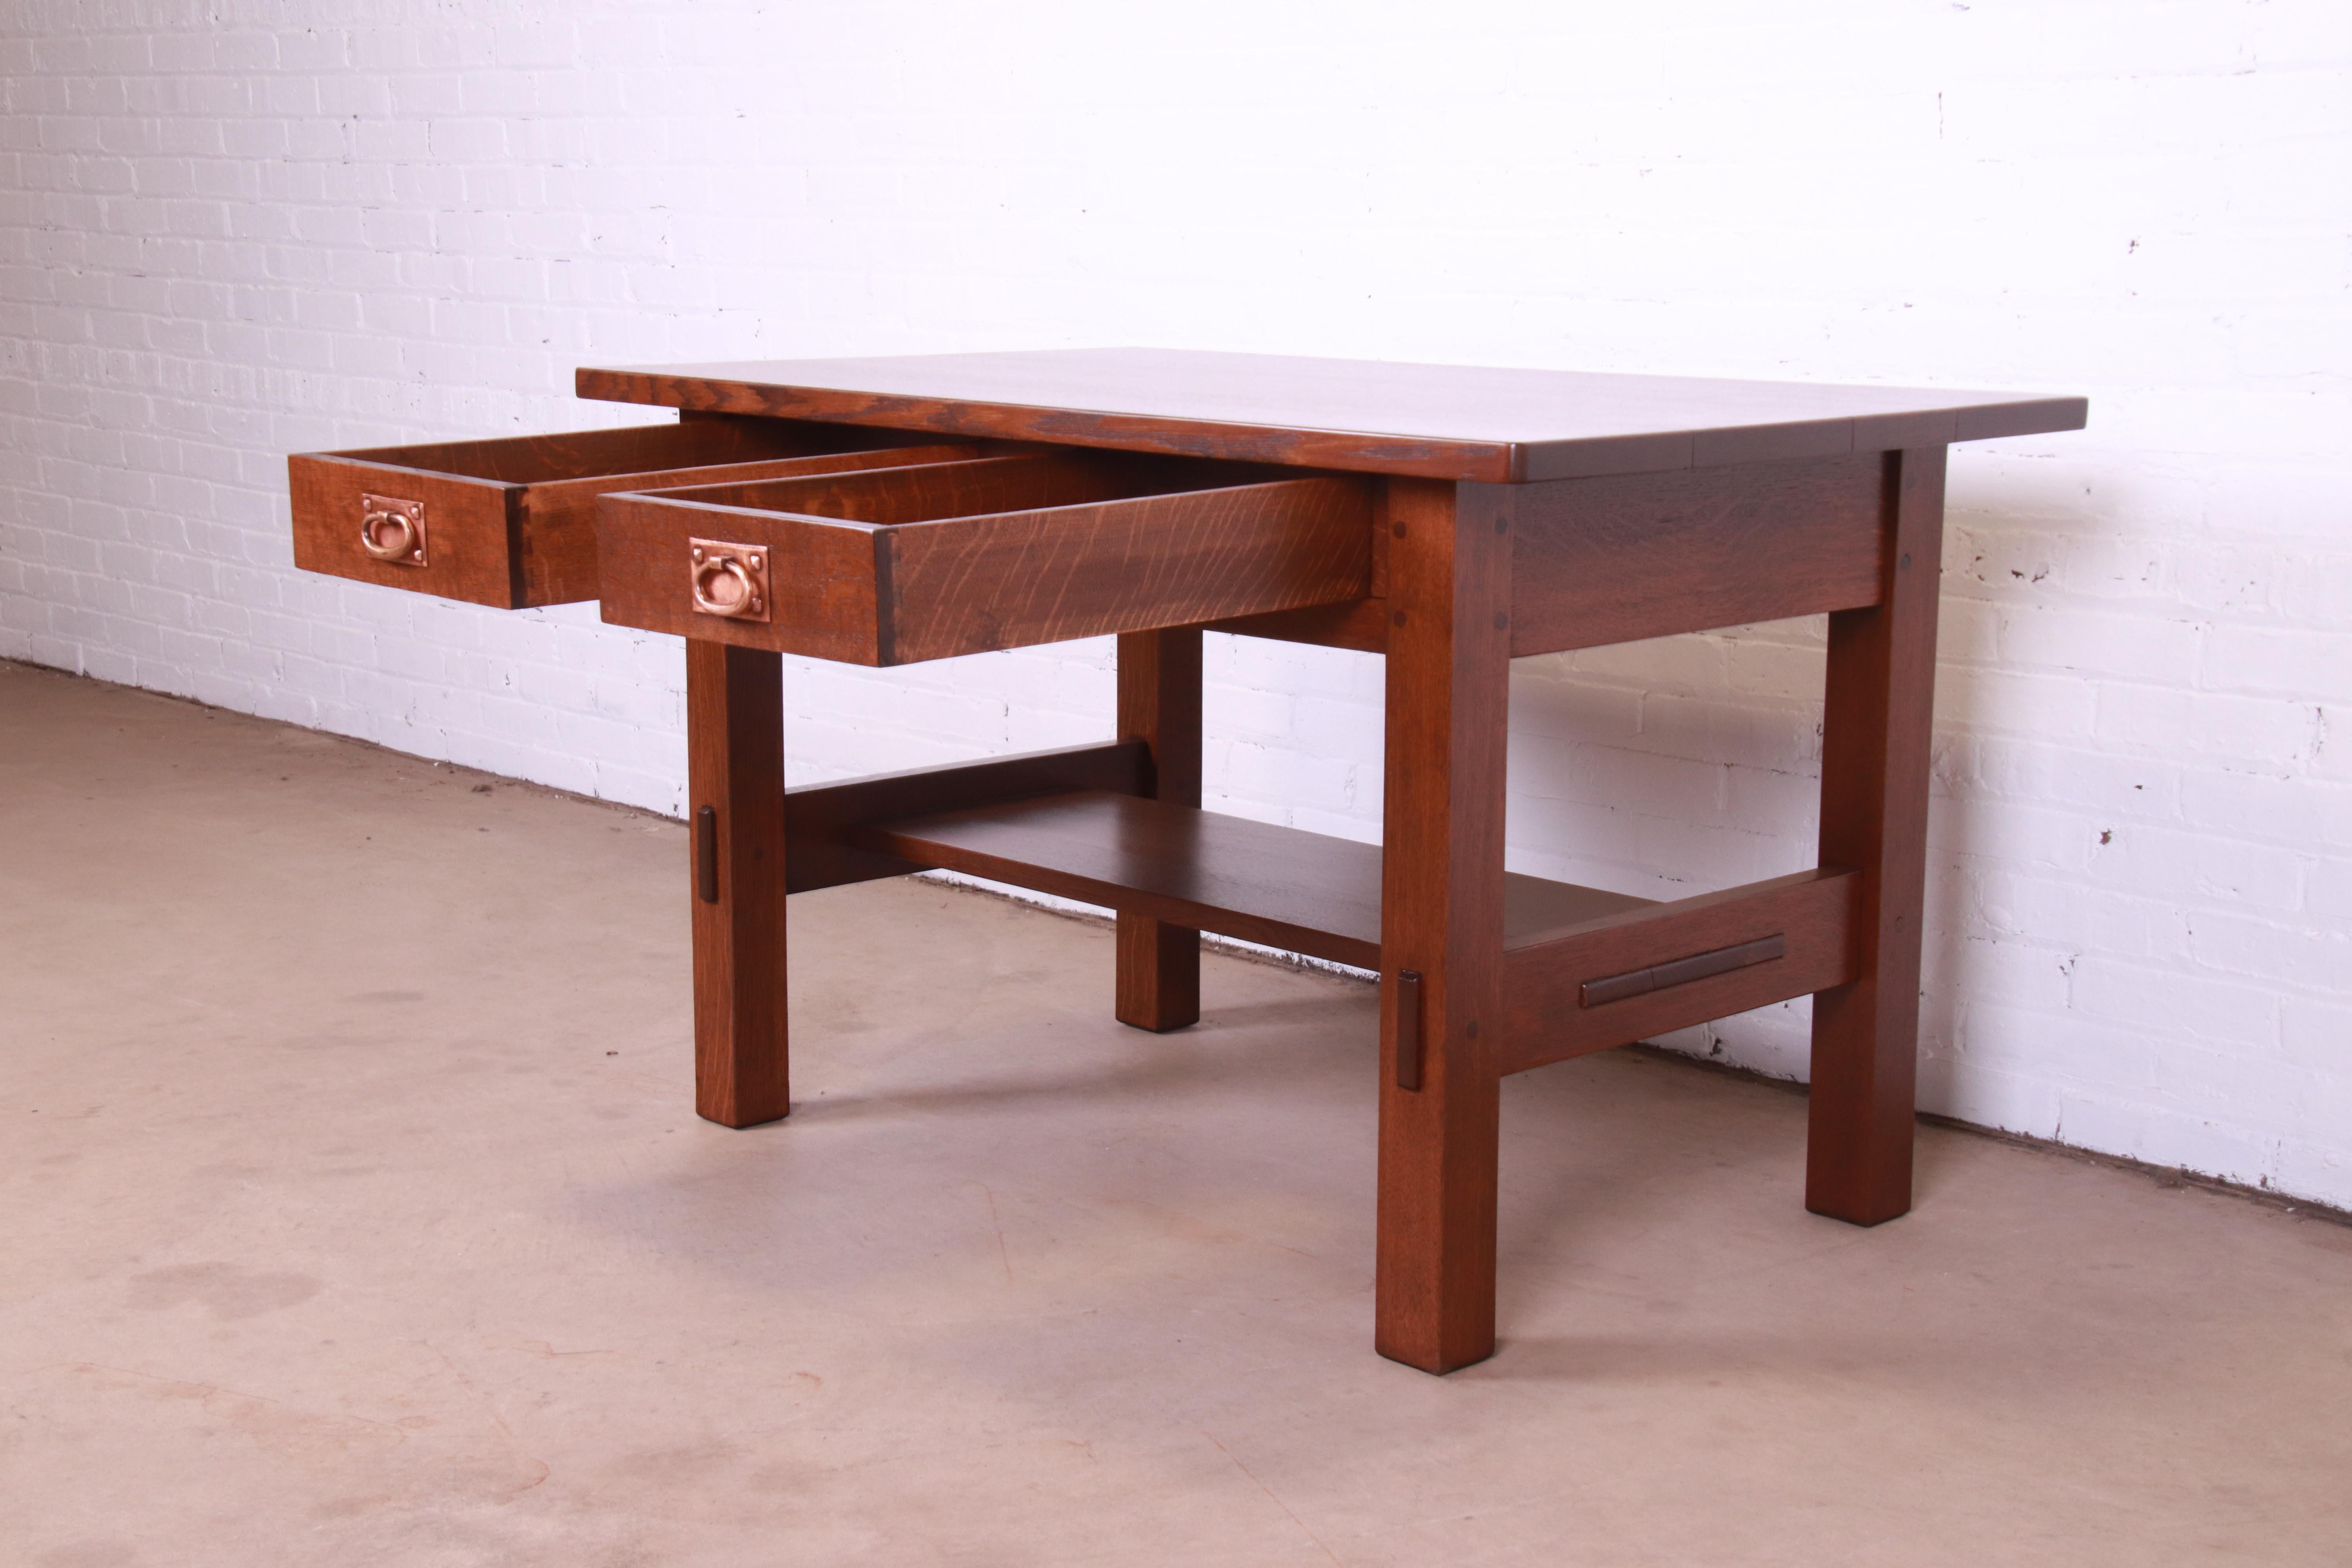 20th Century Gustav Stickley Mission Oak Arts & Crafts Desk or Library Table, Newly Restored